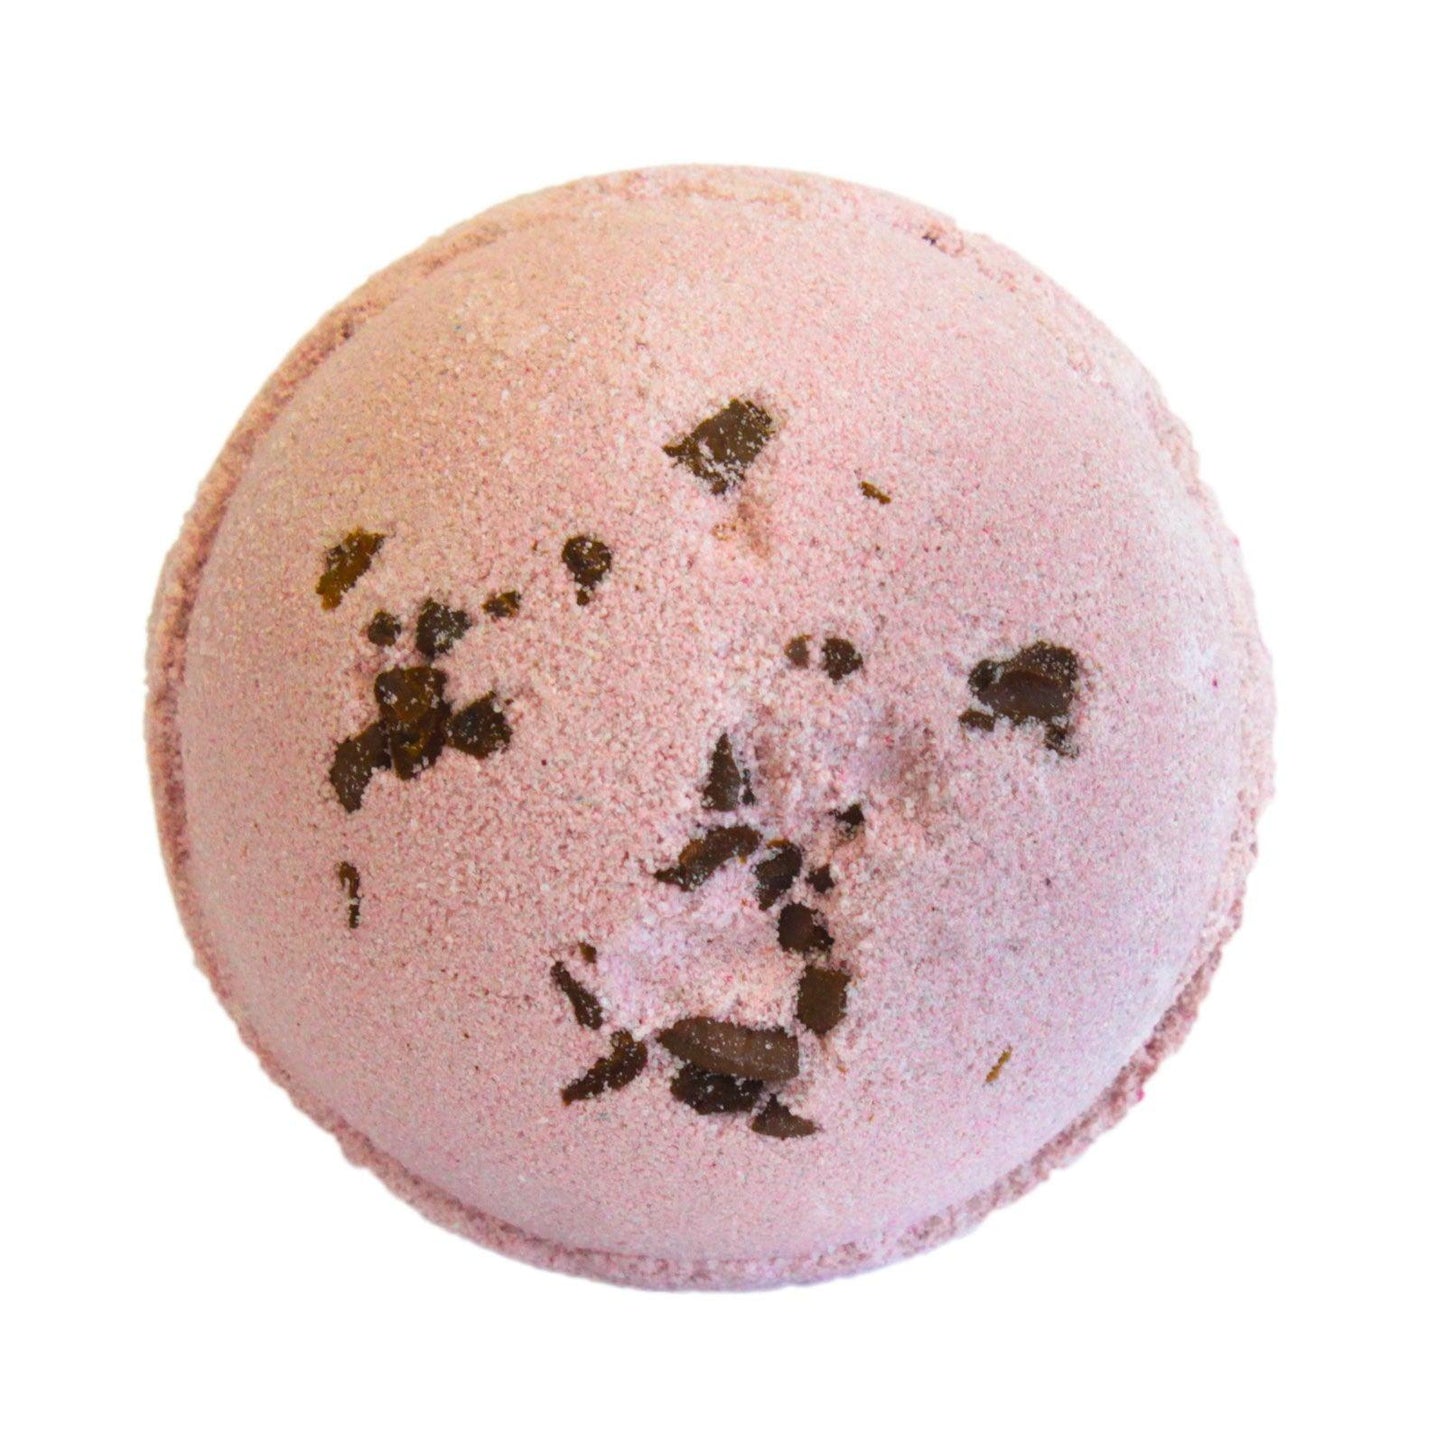 Set of Three Martini Cocktail Scented Bath Bombs Gift Set 120g